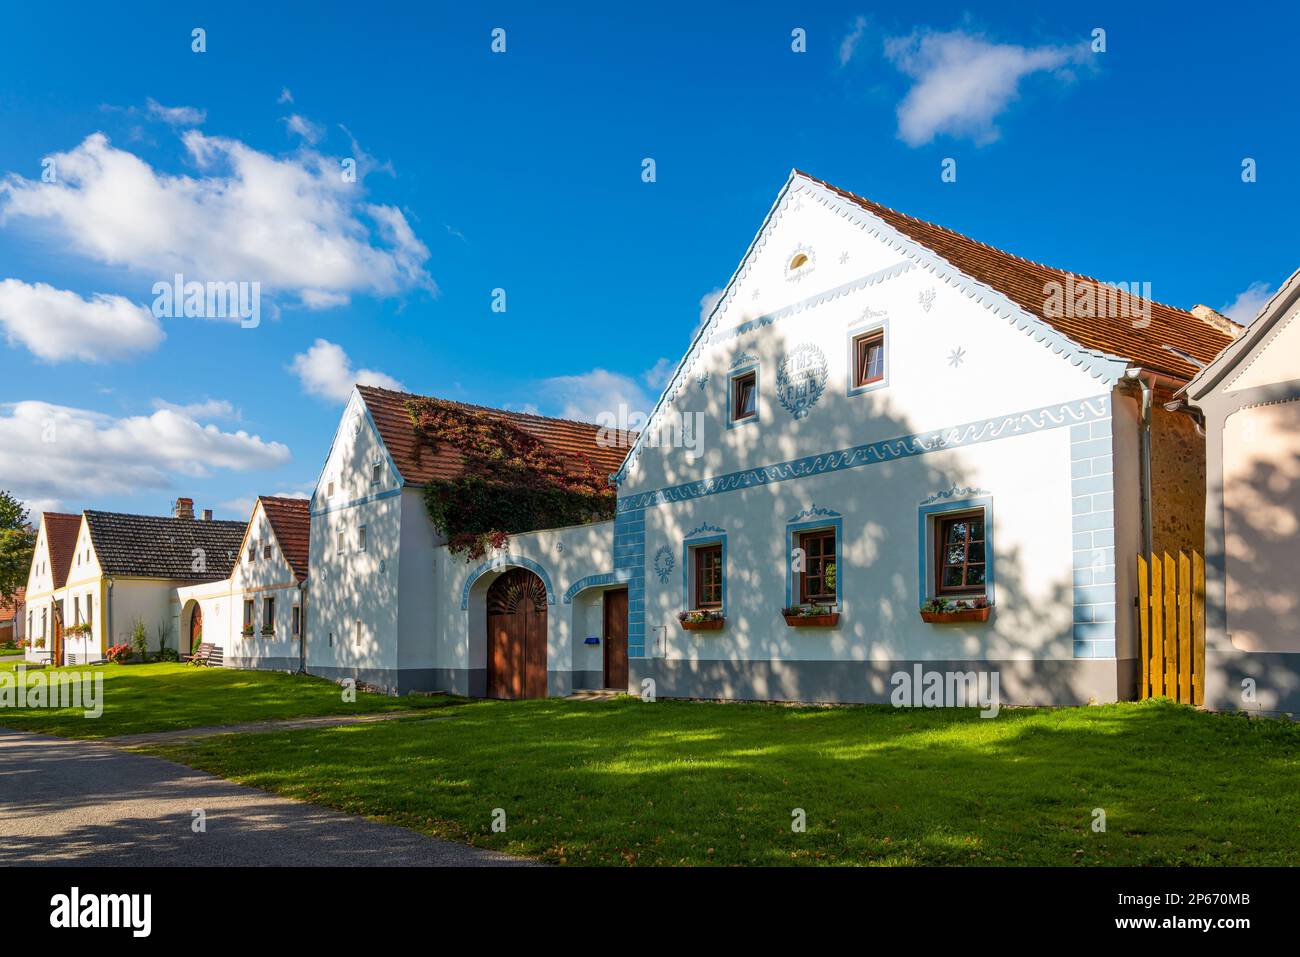 Historical houses at Holasovice Historic Village Reservation, rural baroque style, UNESCO World Heritage Site, Holasovice, Czech Republic (Czechia) Stock Photo